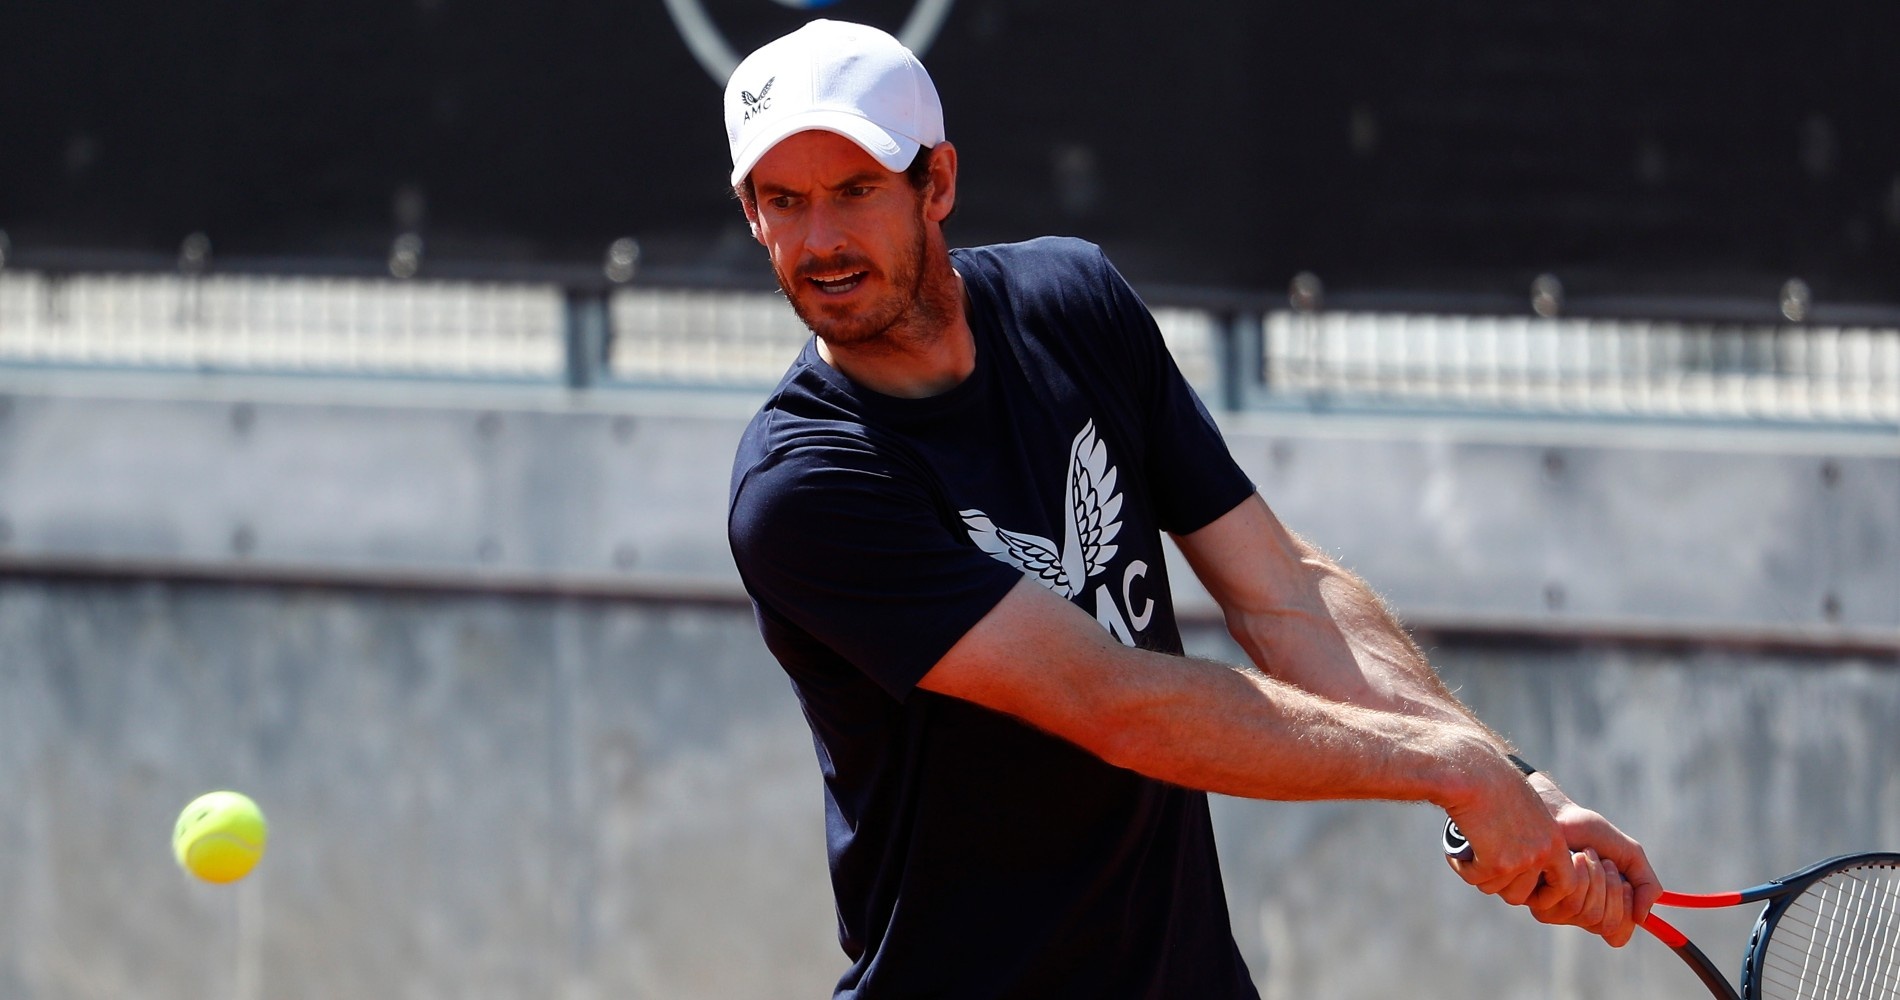 Andy Murray at Rome in 2021